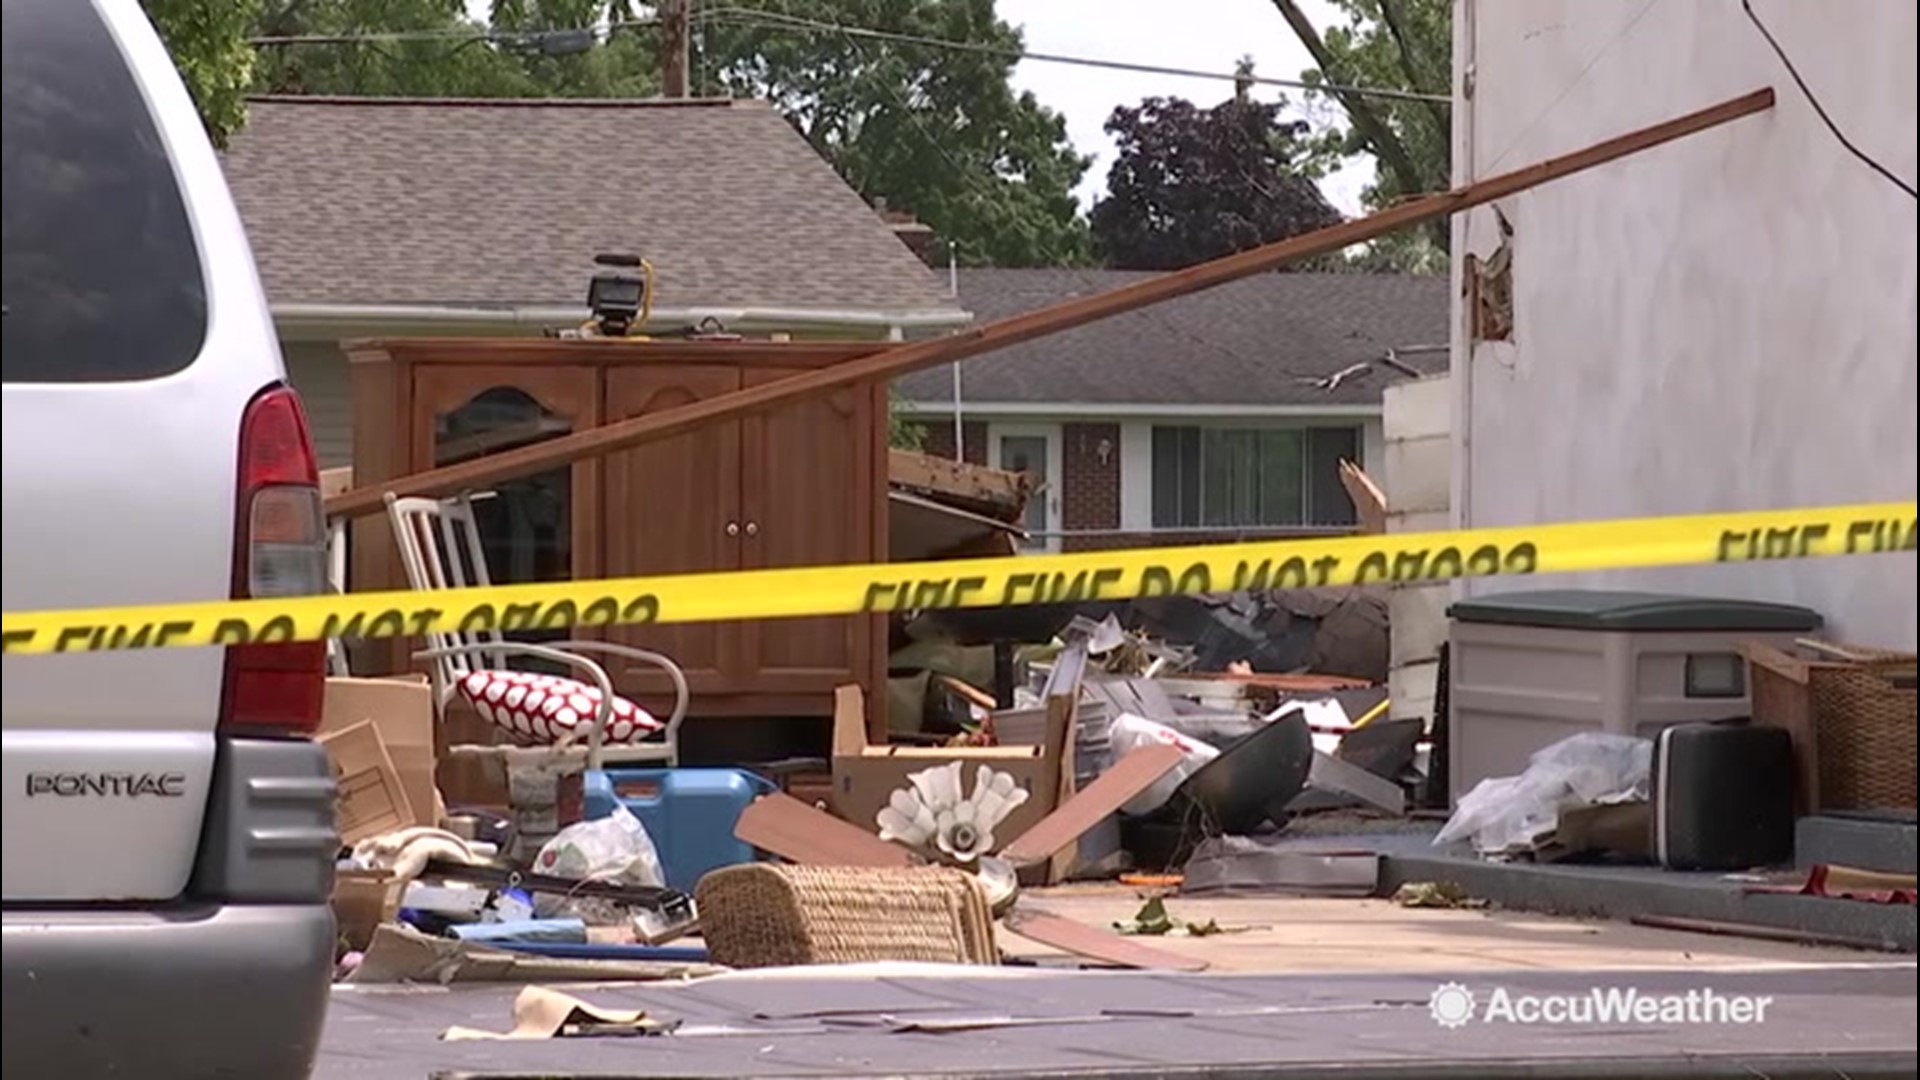 A microburst rocked the town of Jenison, Michigan on July 20, creating winds that downed trees and caused severe structural damage to homes.